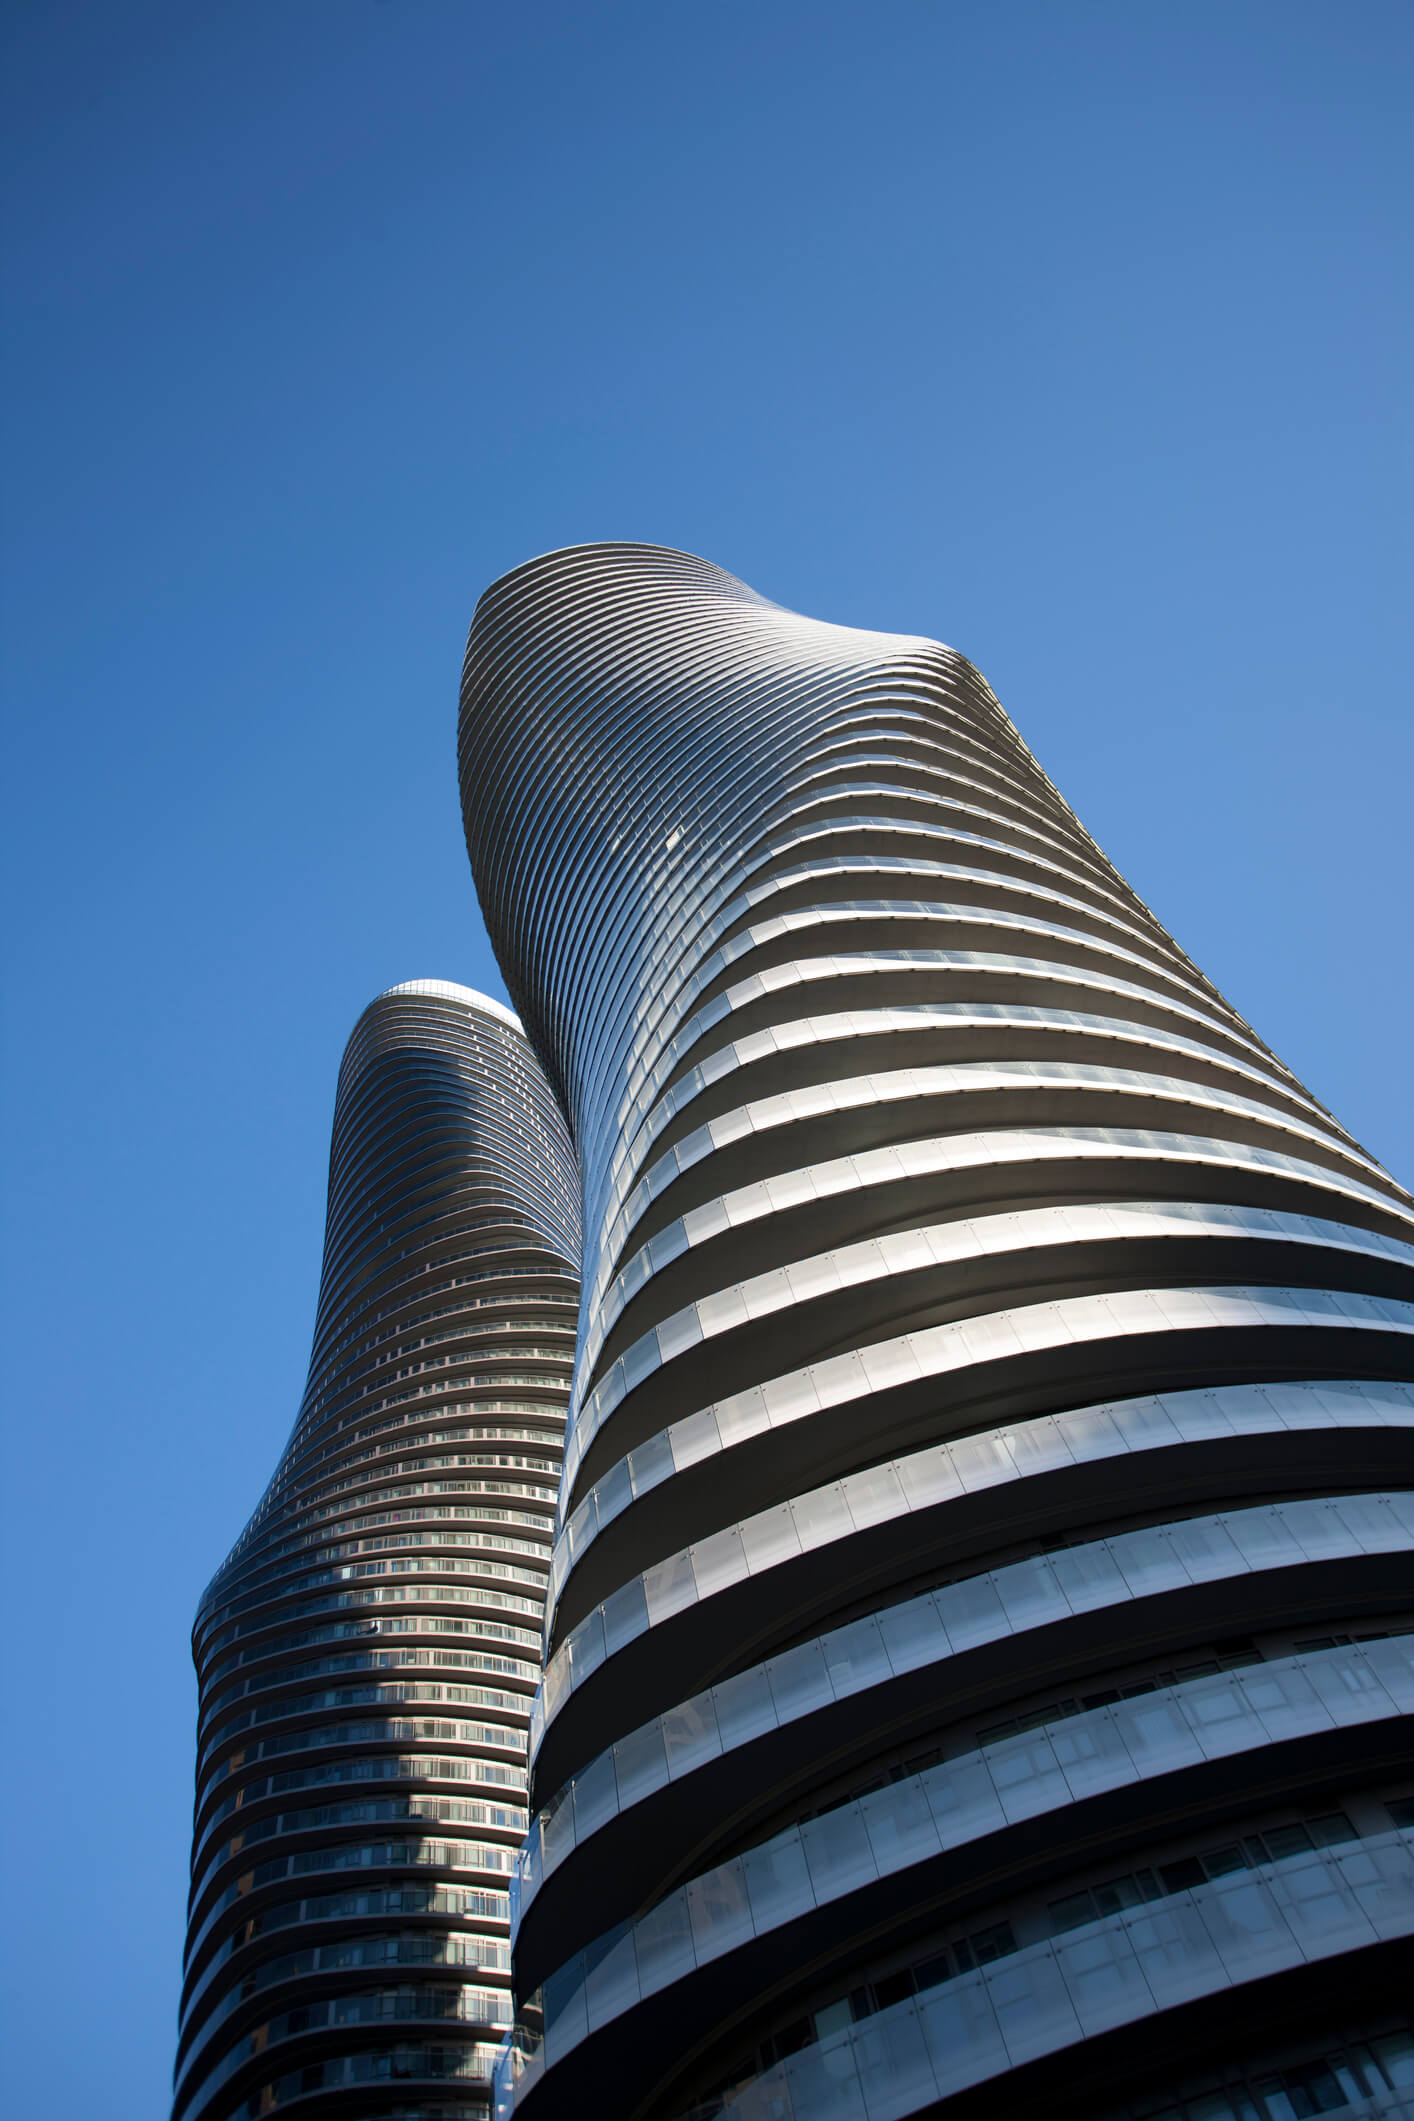 View of the two Mississauga Towers